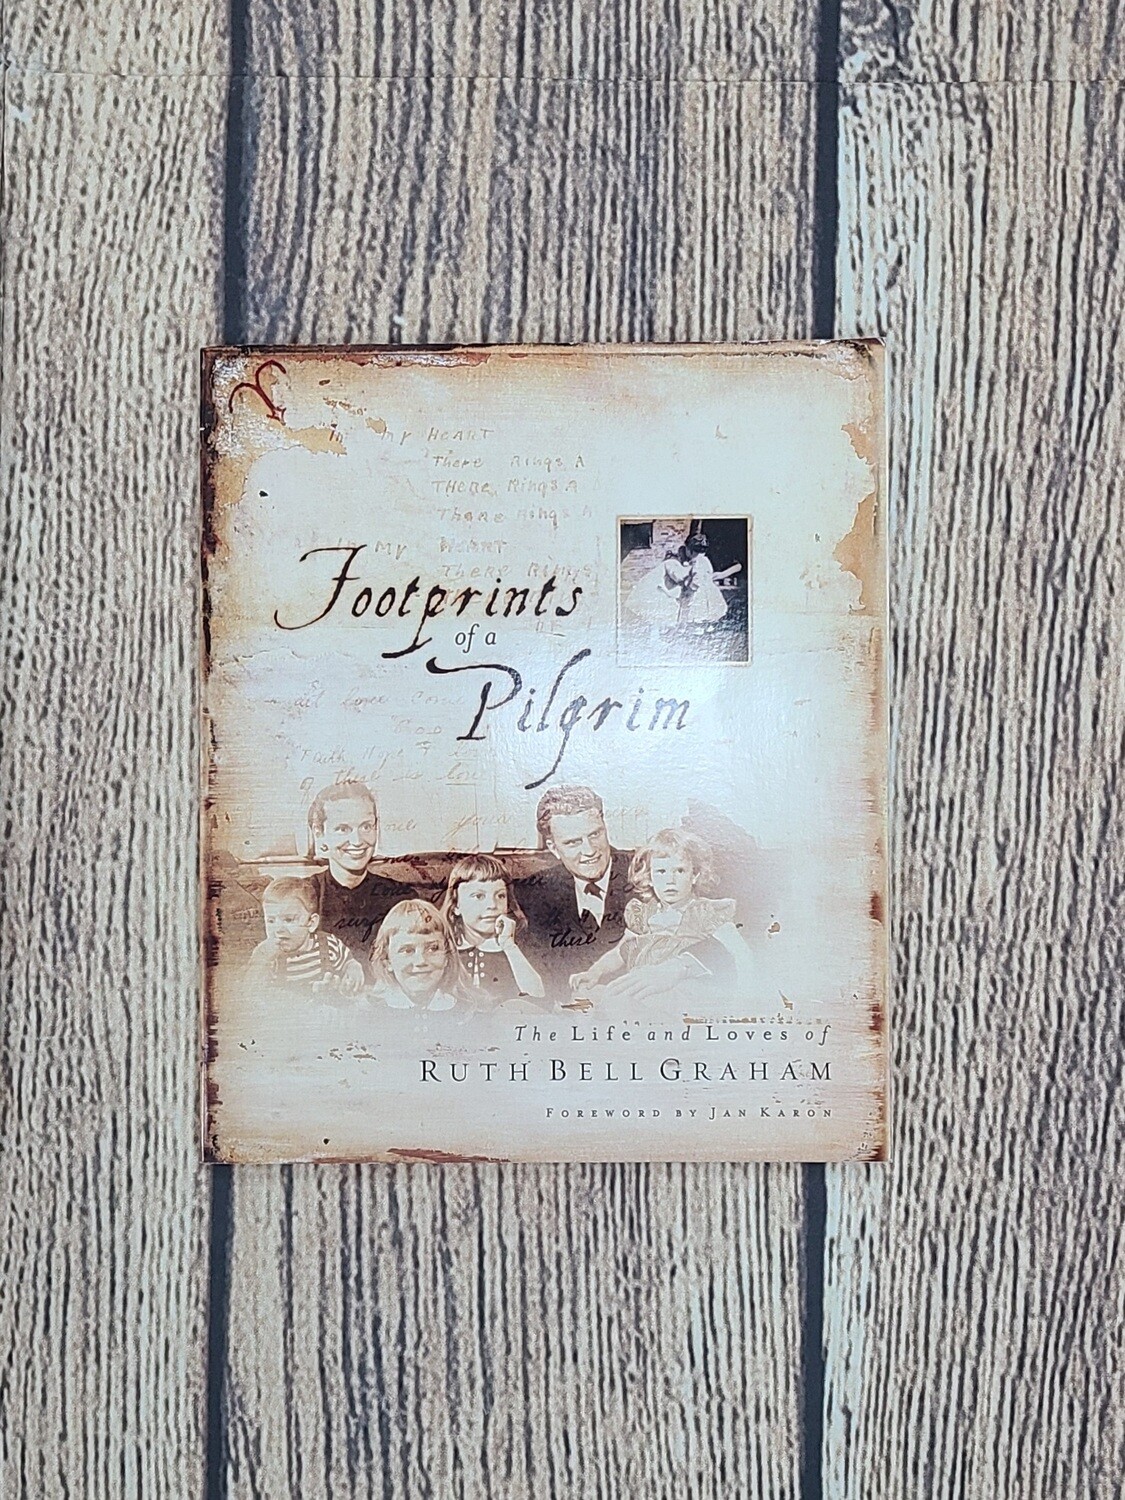 Footprints of a Pilgrim by Ruth Bell Graham